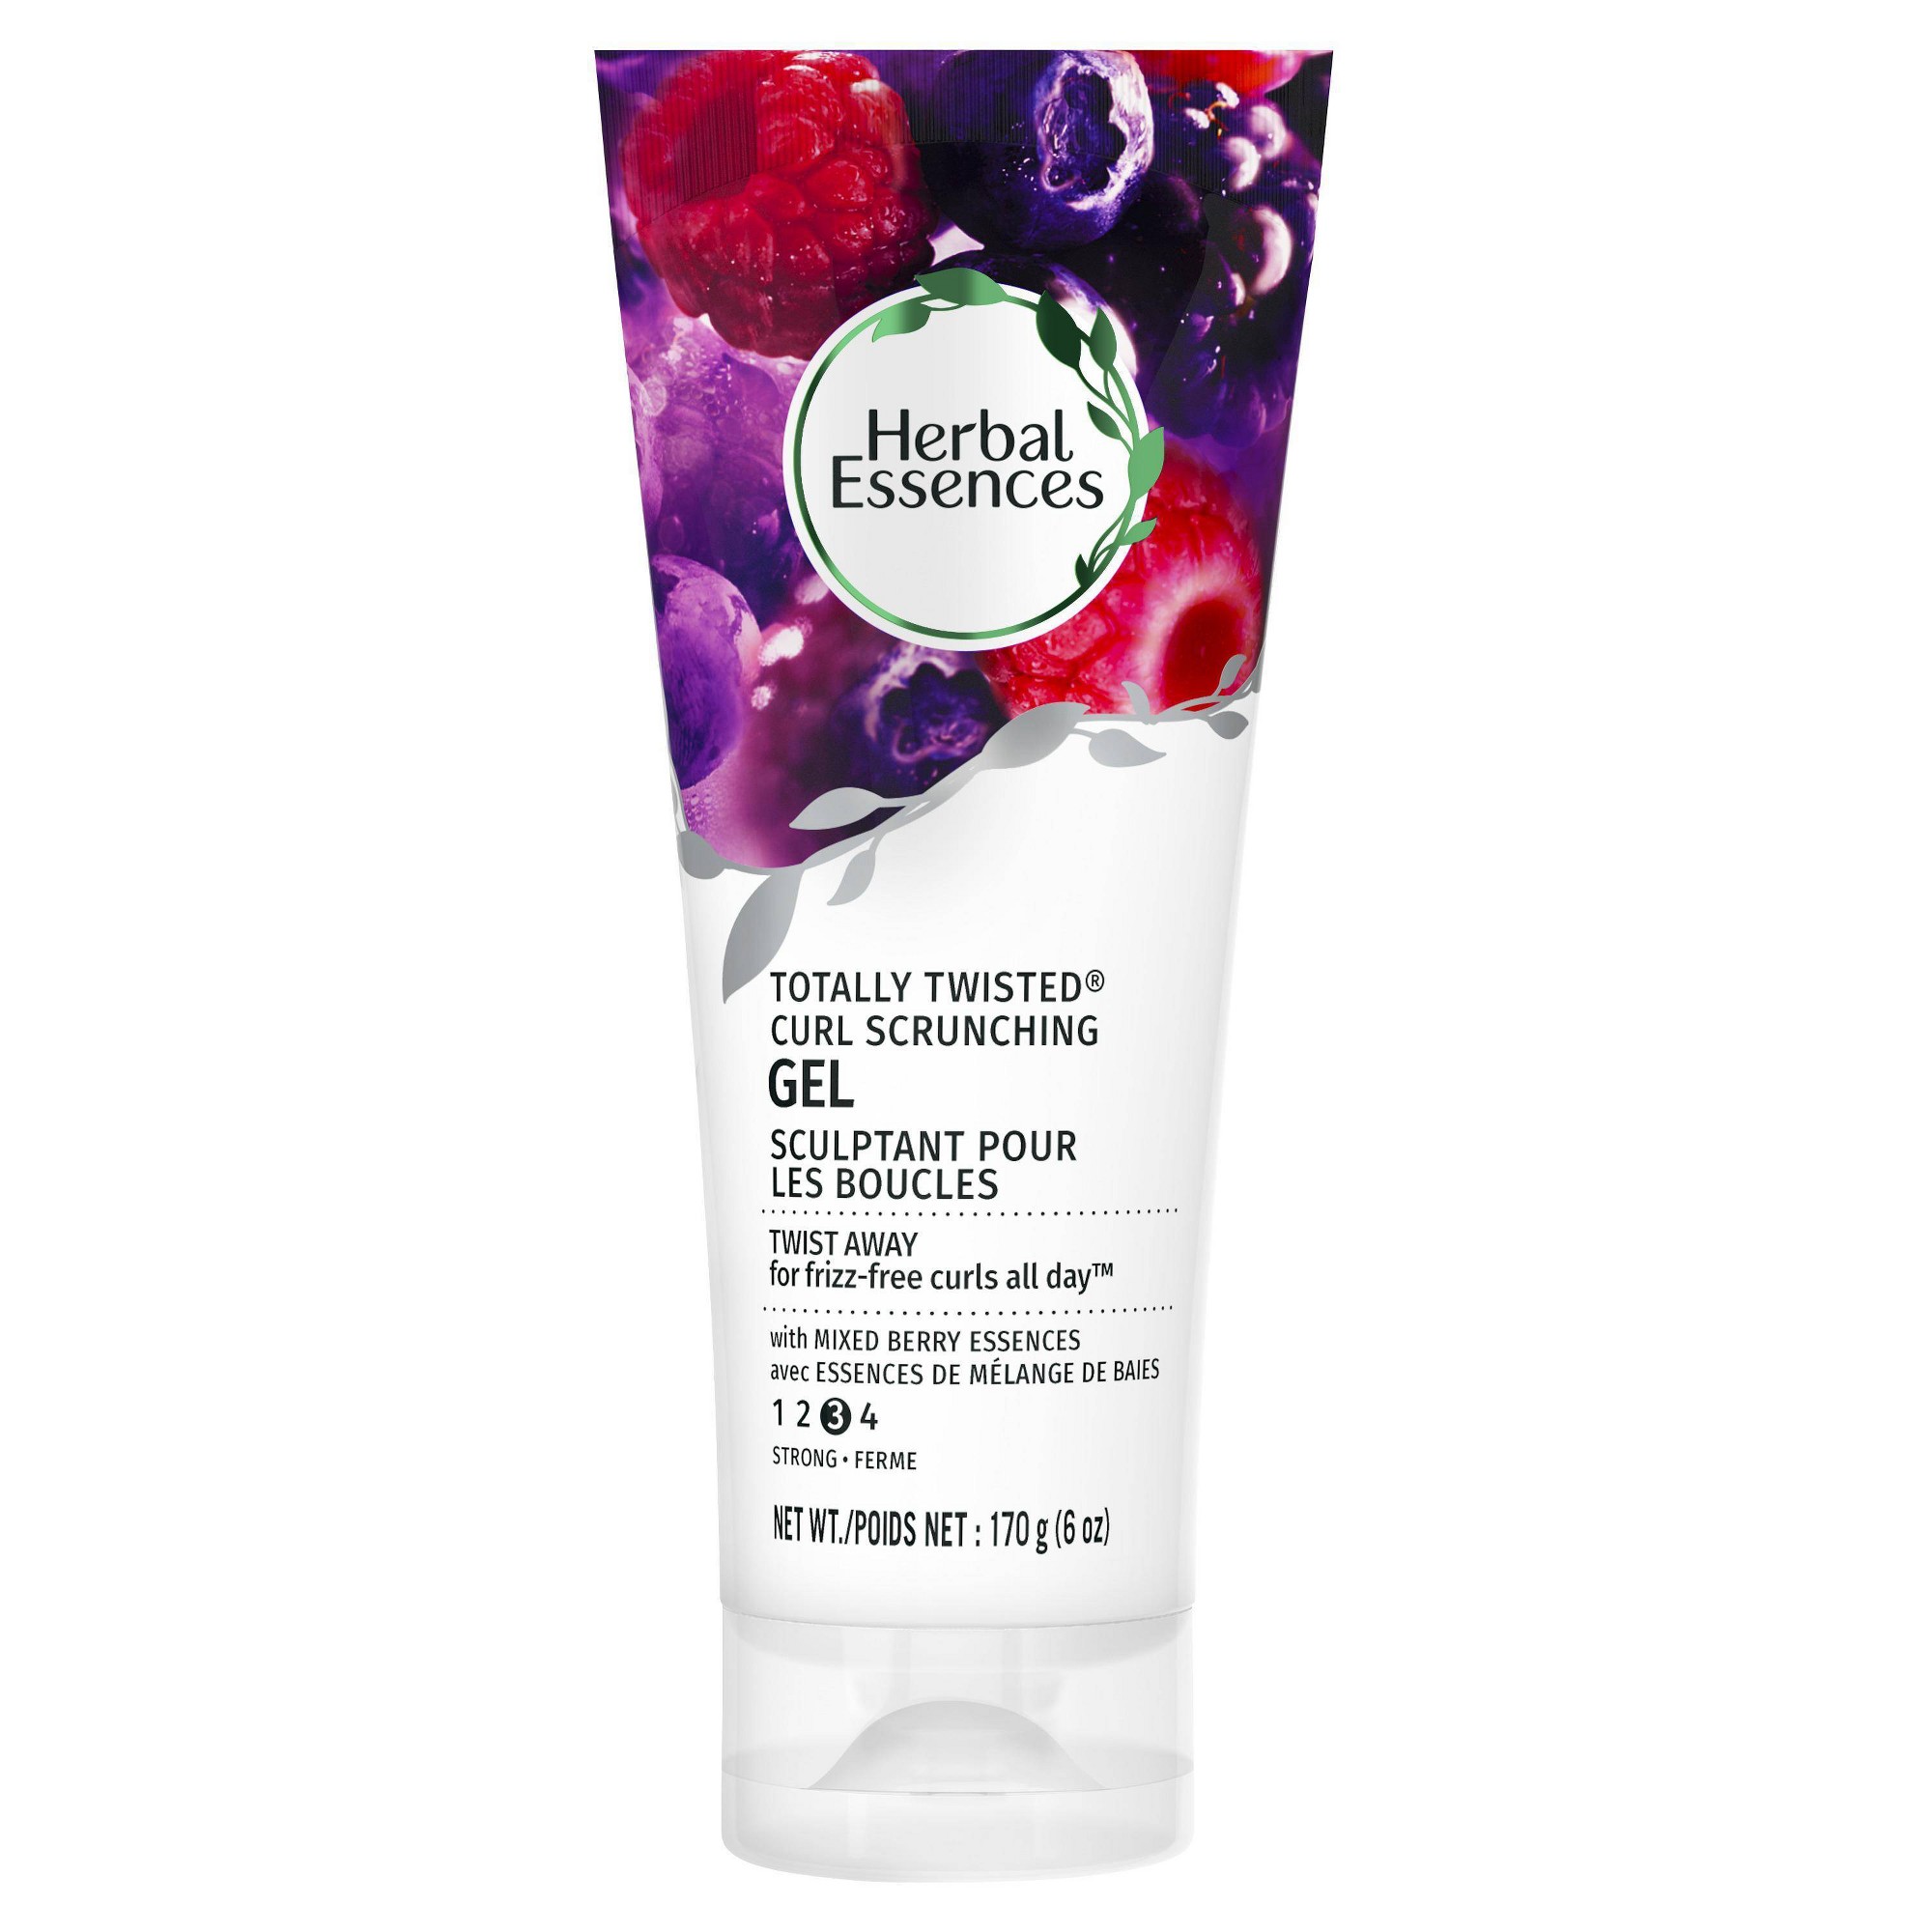 Herbal Essences Totally Twisted Curl-Scrunching Gel with Berry Essences - 6oz